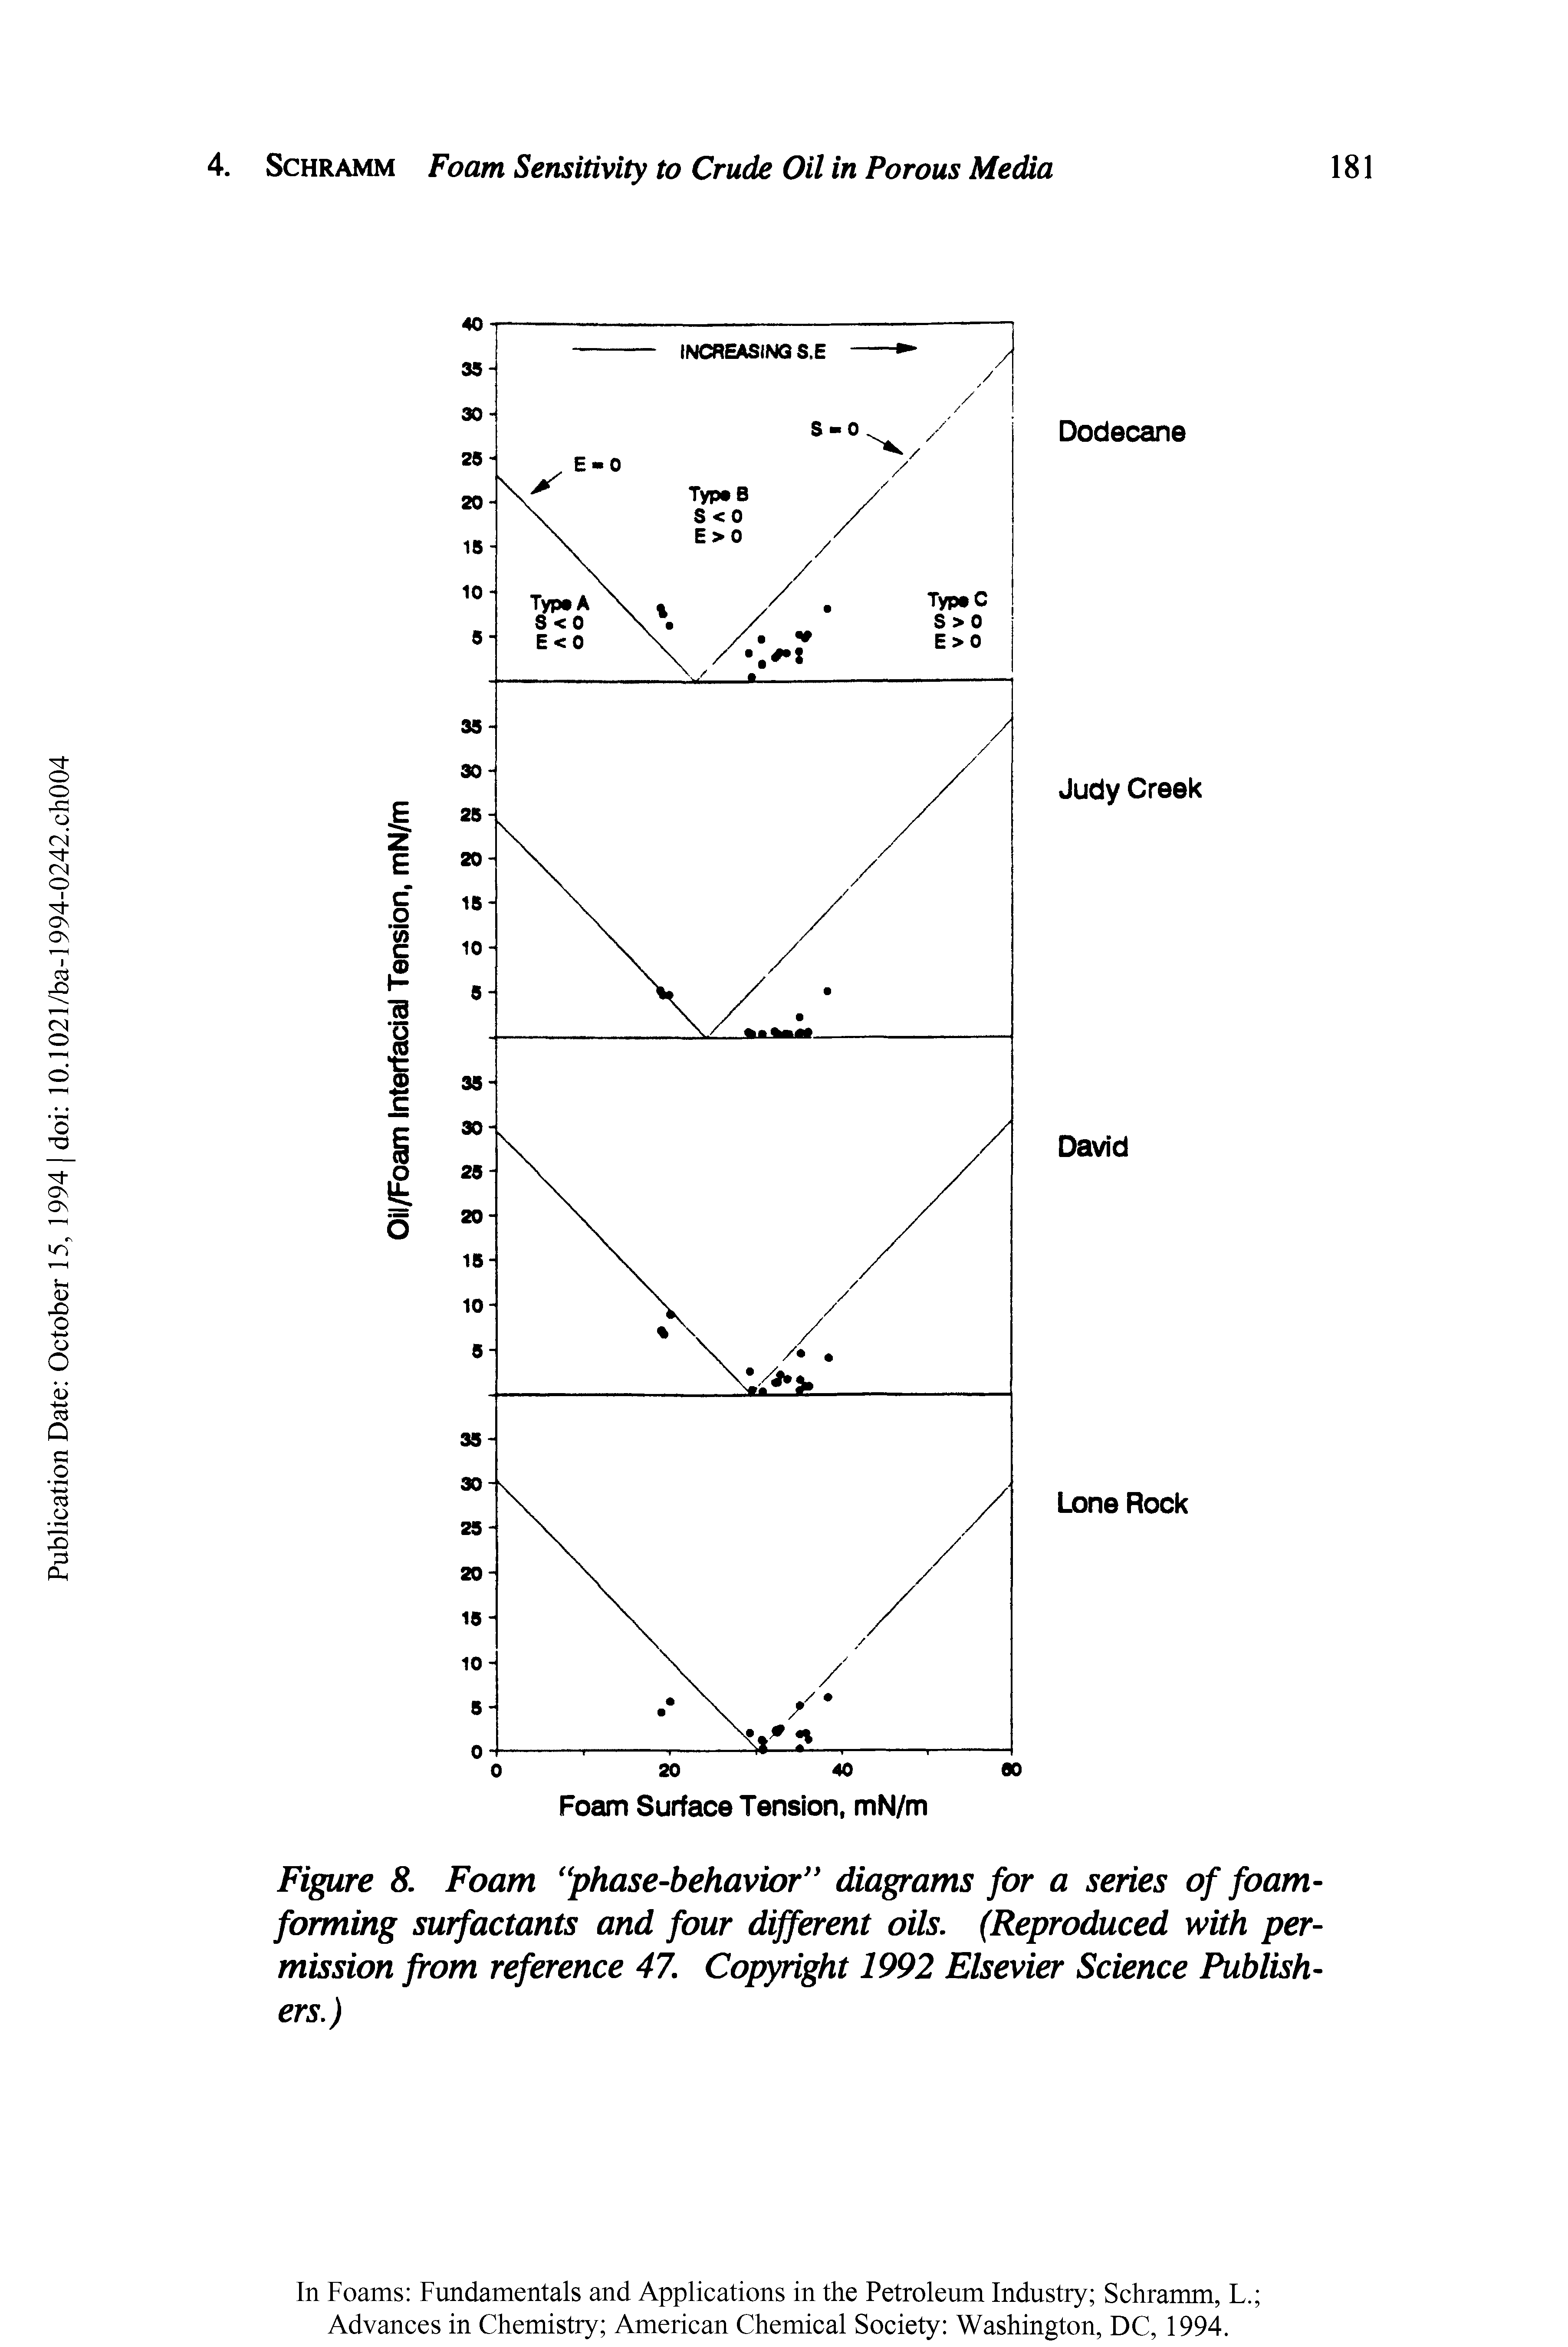 Figure 8. Foam phase-behavior diagrams for a series of foam-forming surfactants and four different oils. (Reproduced with permission from reference 47. Copyright 1992 Elsevier Science Publishers.)...